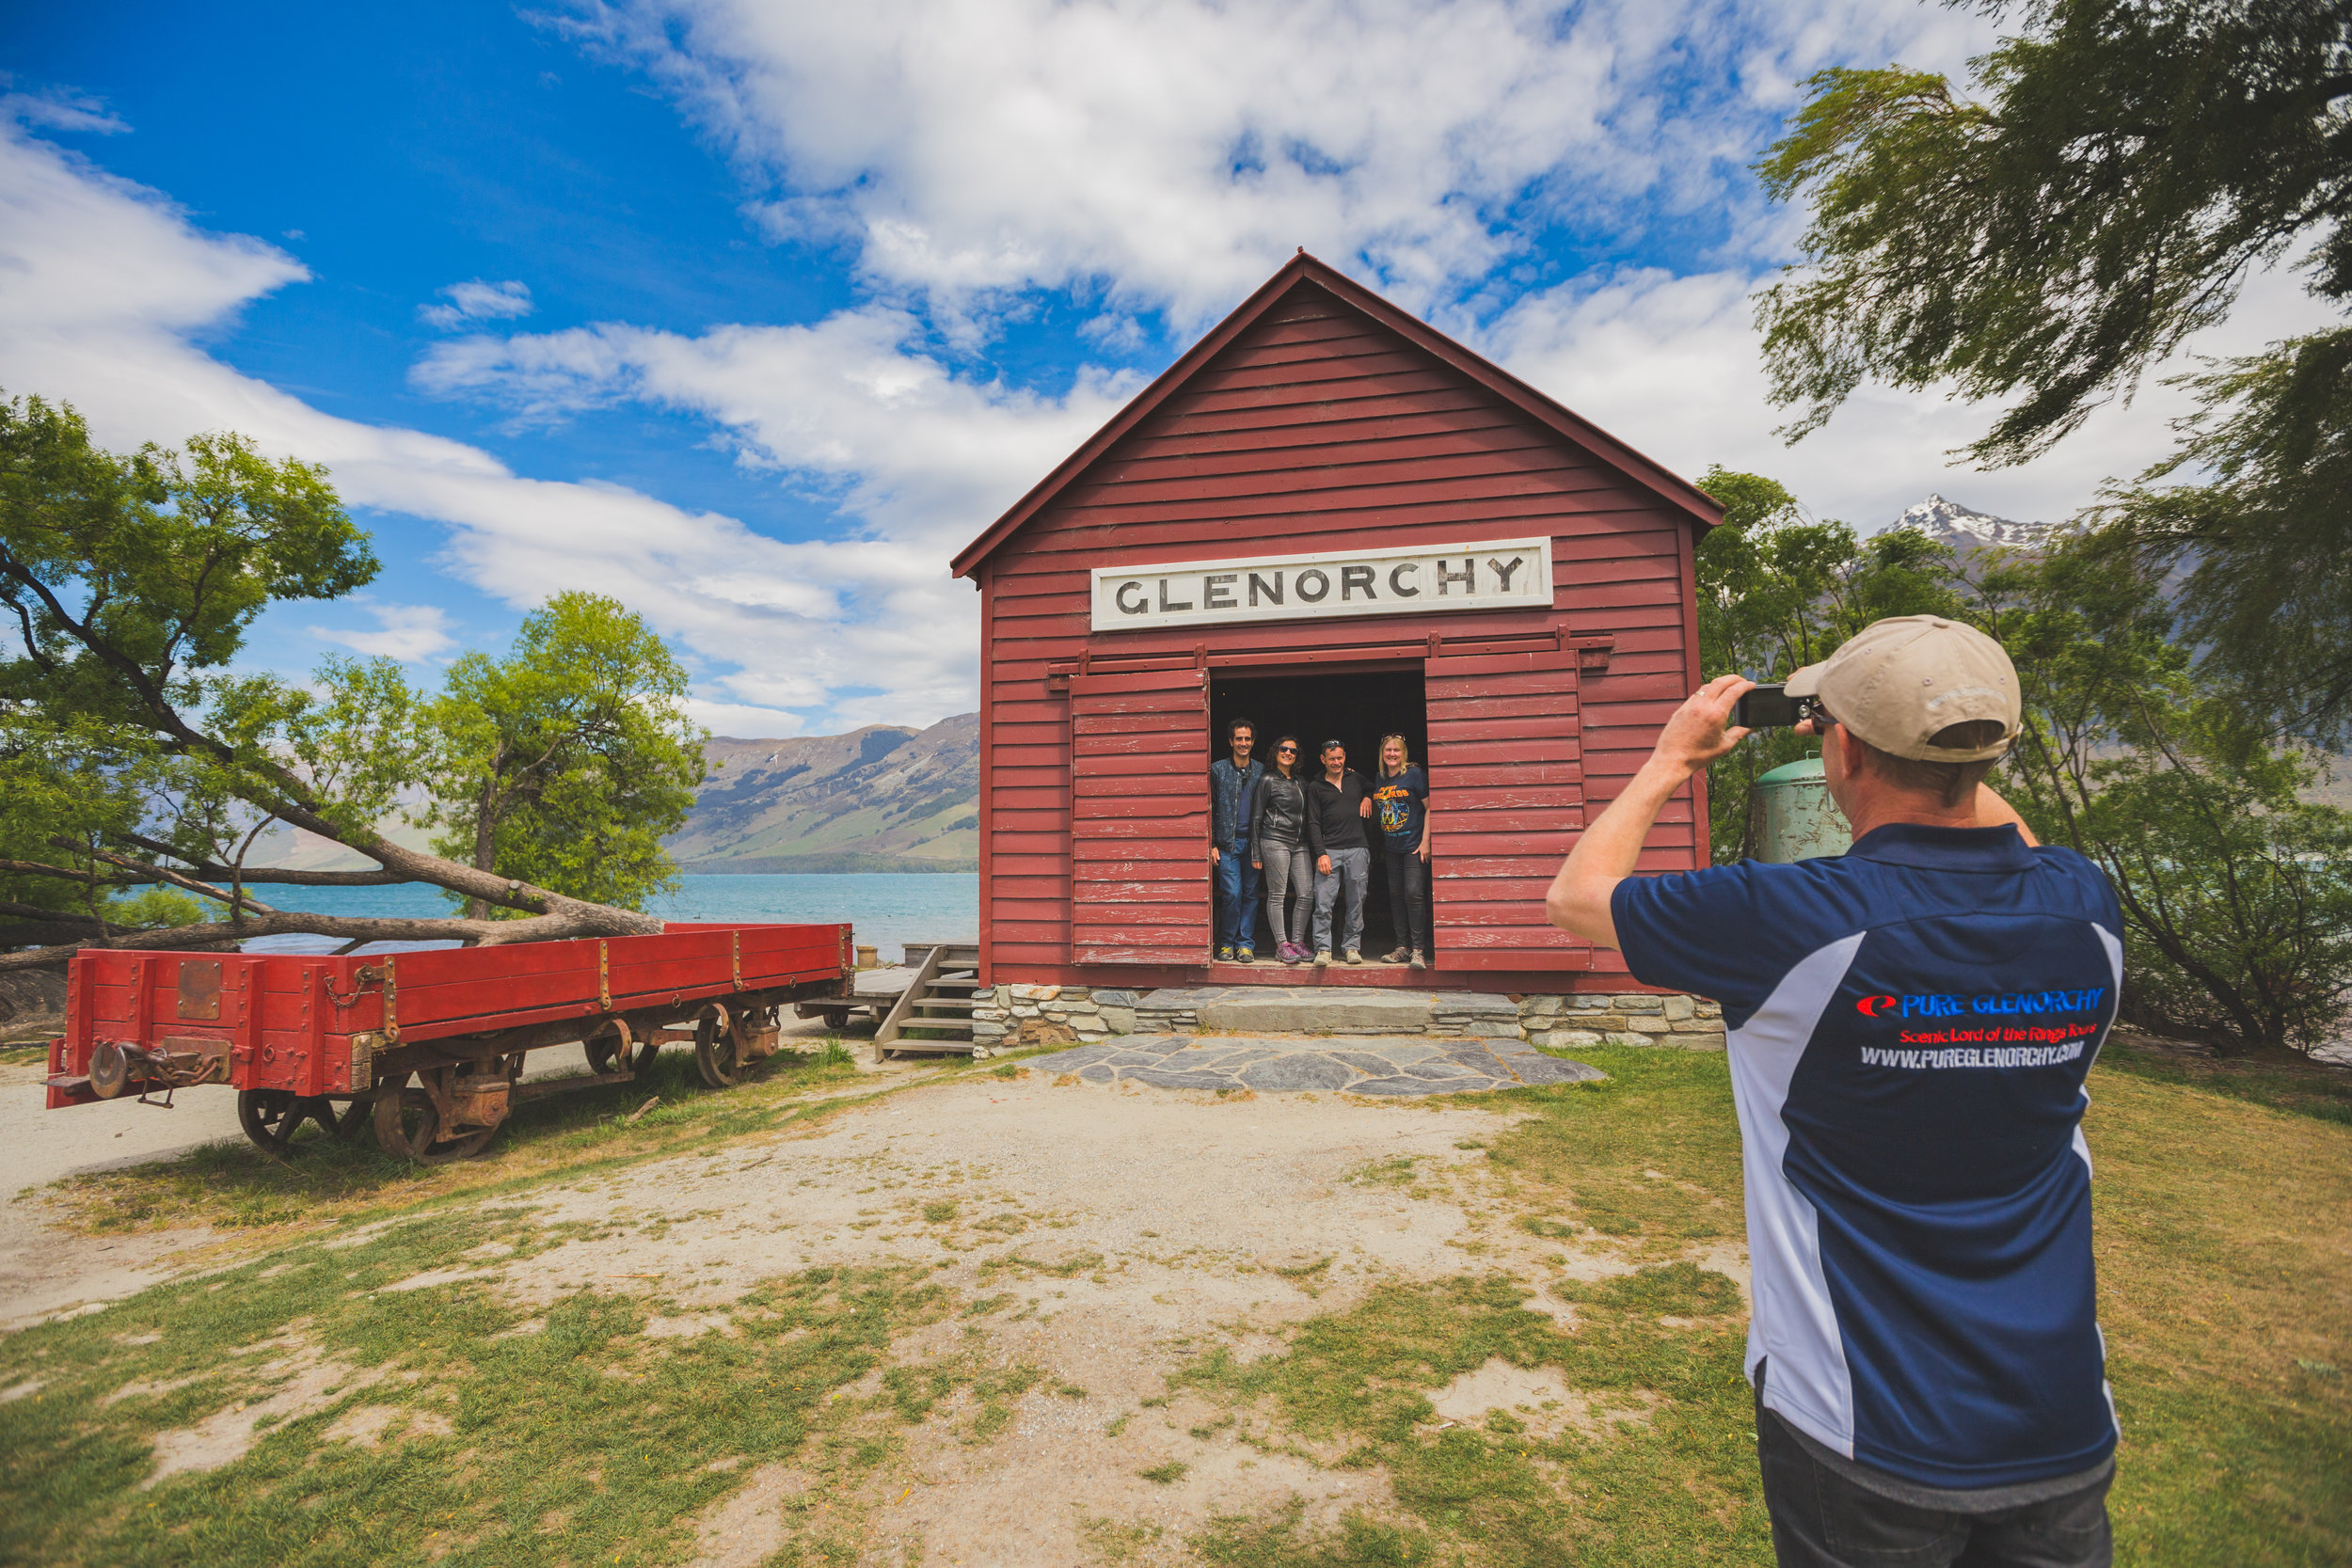 Glenorchy historic red shed.jpg